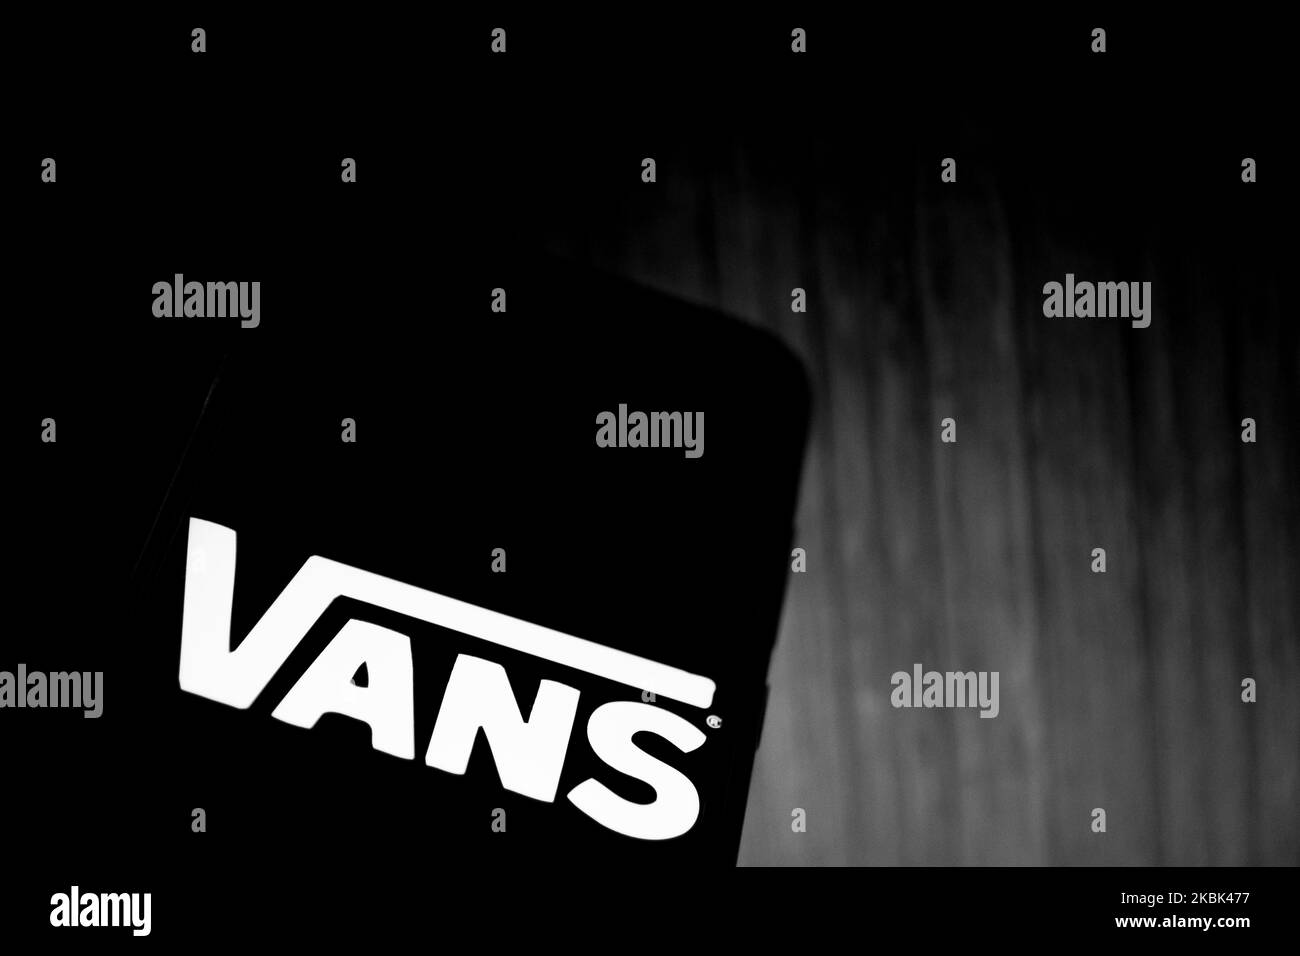 Vans logo Black and White Stock Photos & Images - Alamy